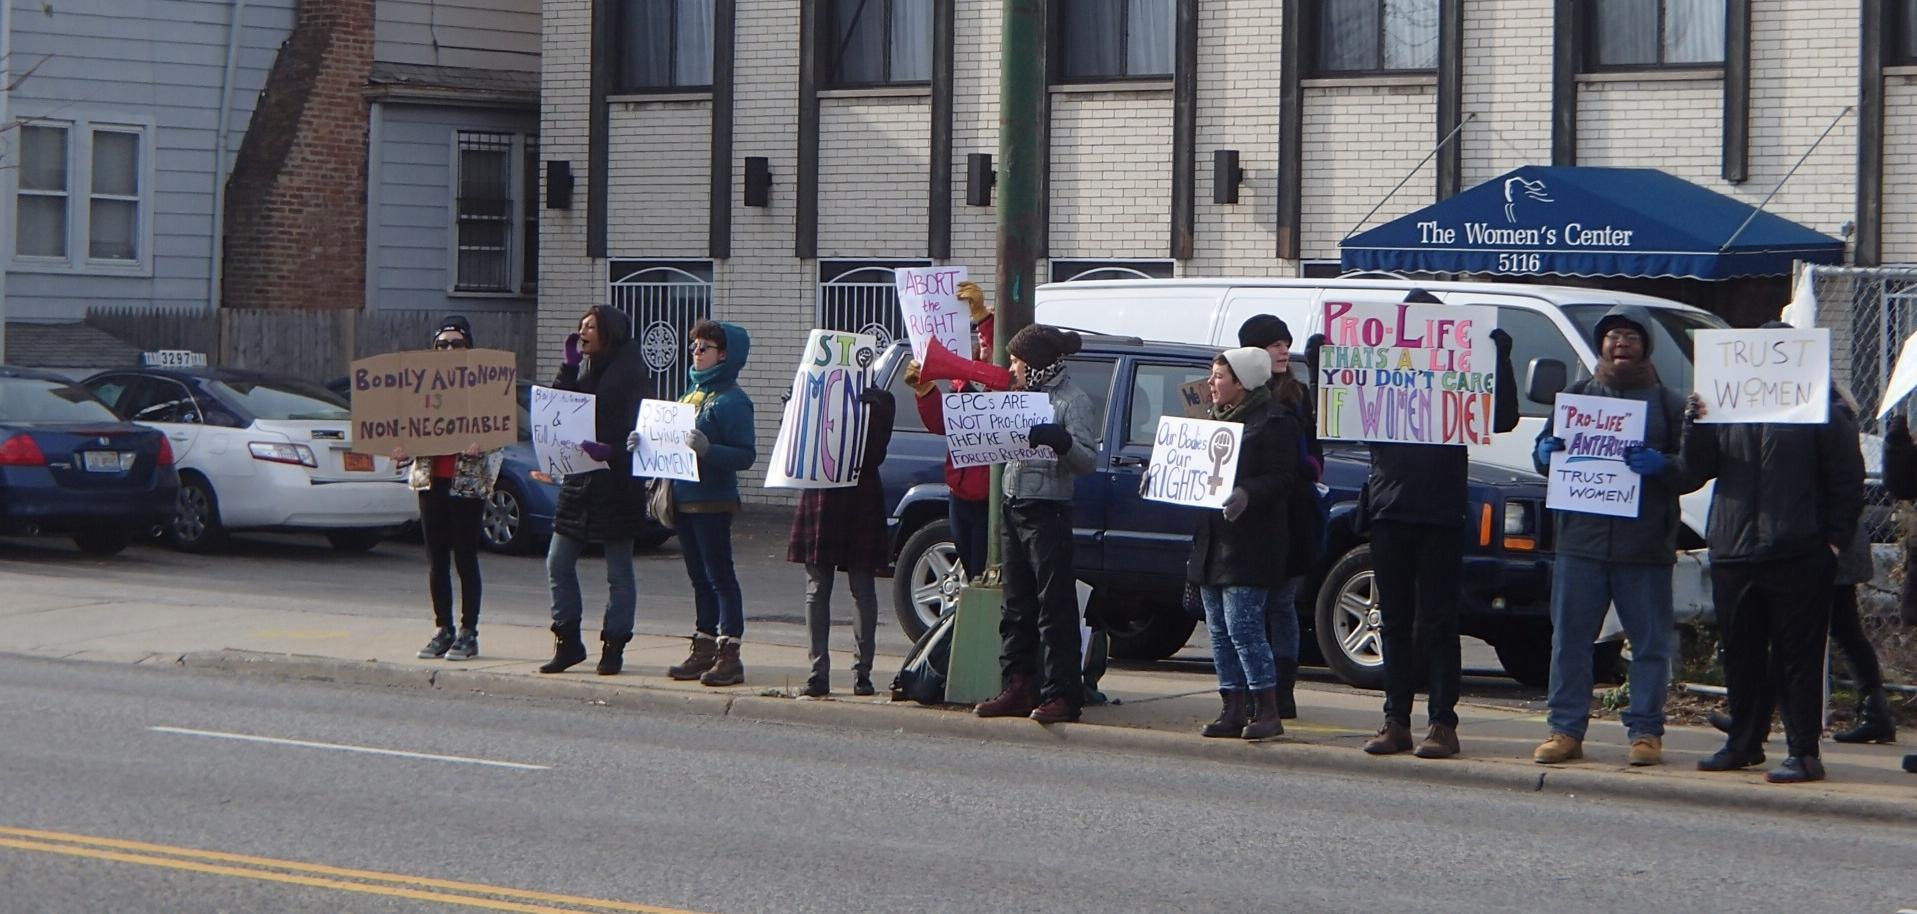 A group of people in Chicago holding protest signs